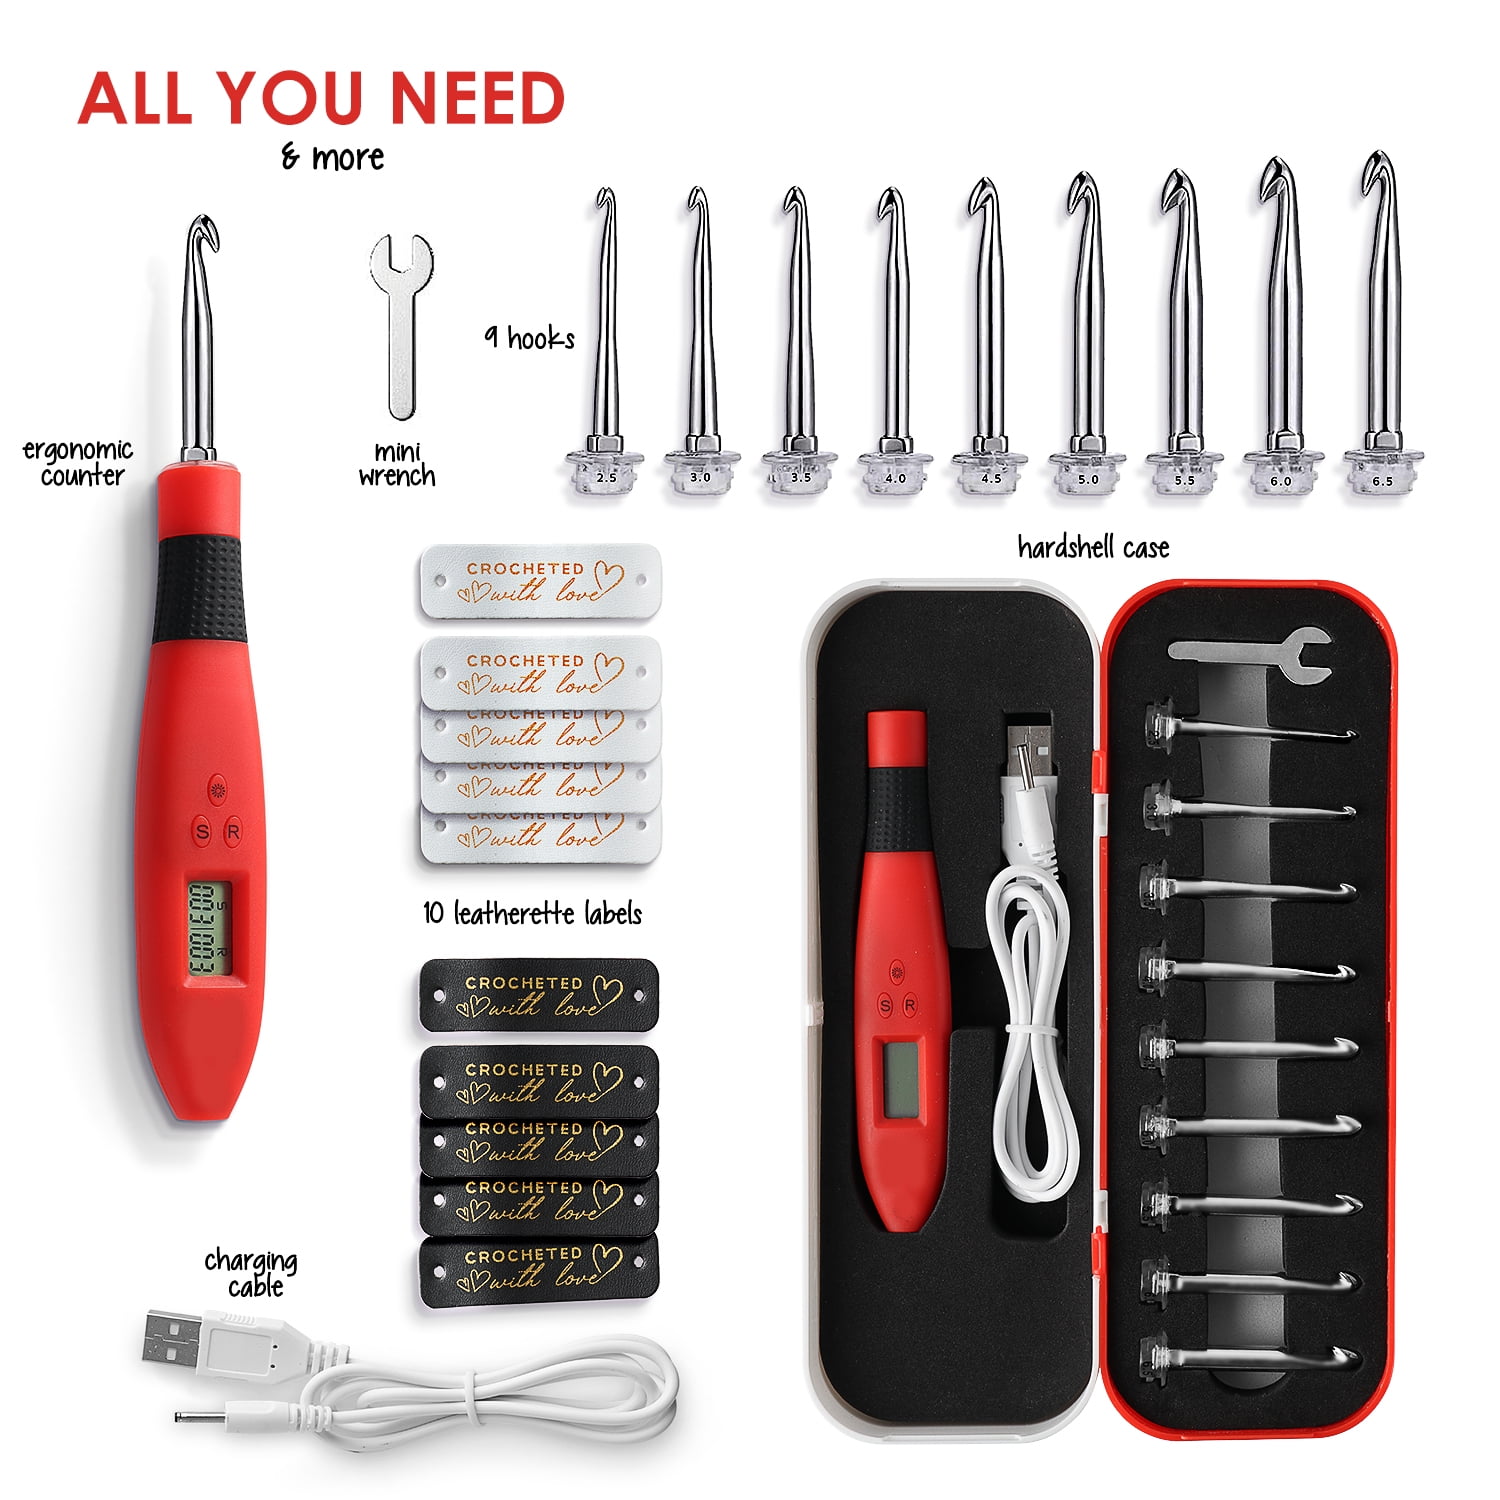 Craftbud Crochet Counter, Crochet Hook Set with Crochet Needles and Accessories, 23pc, Red